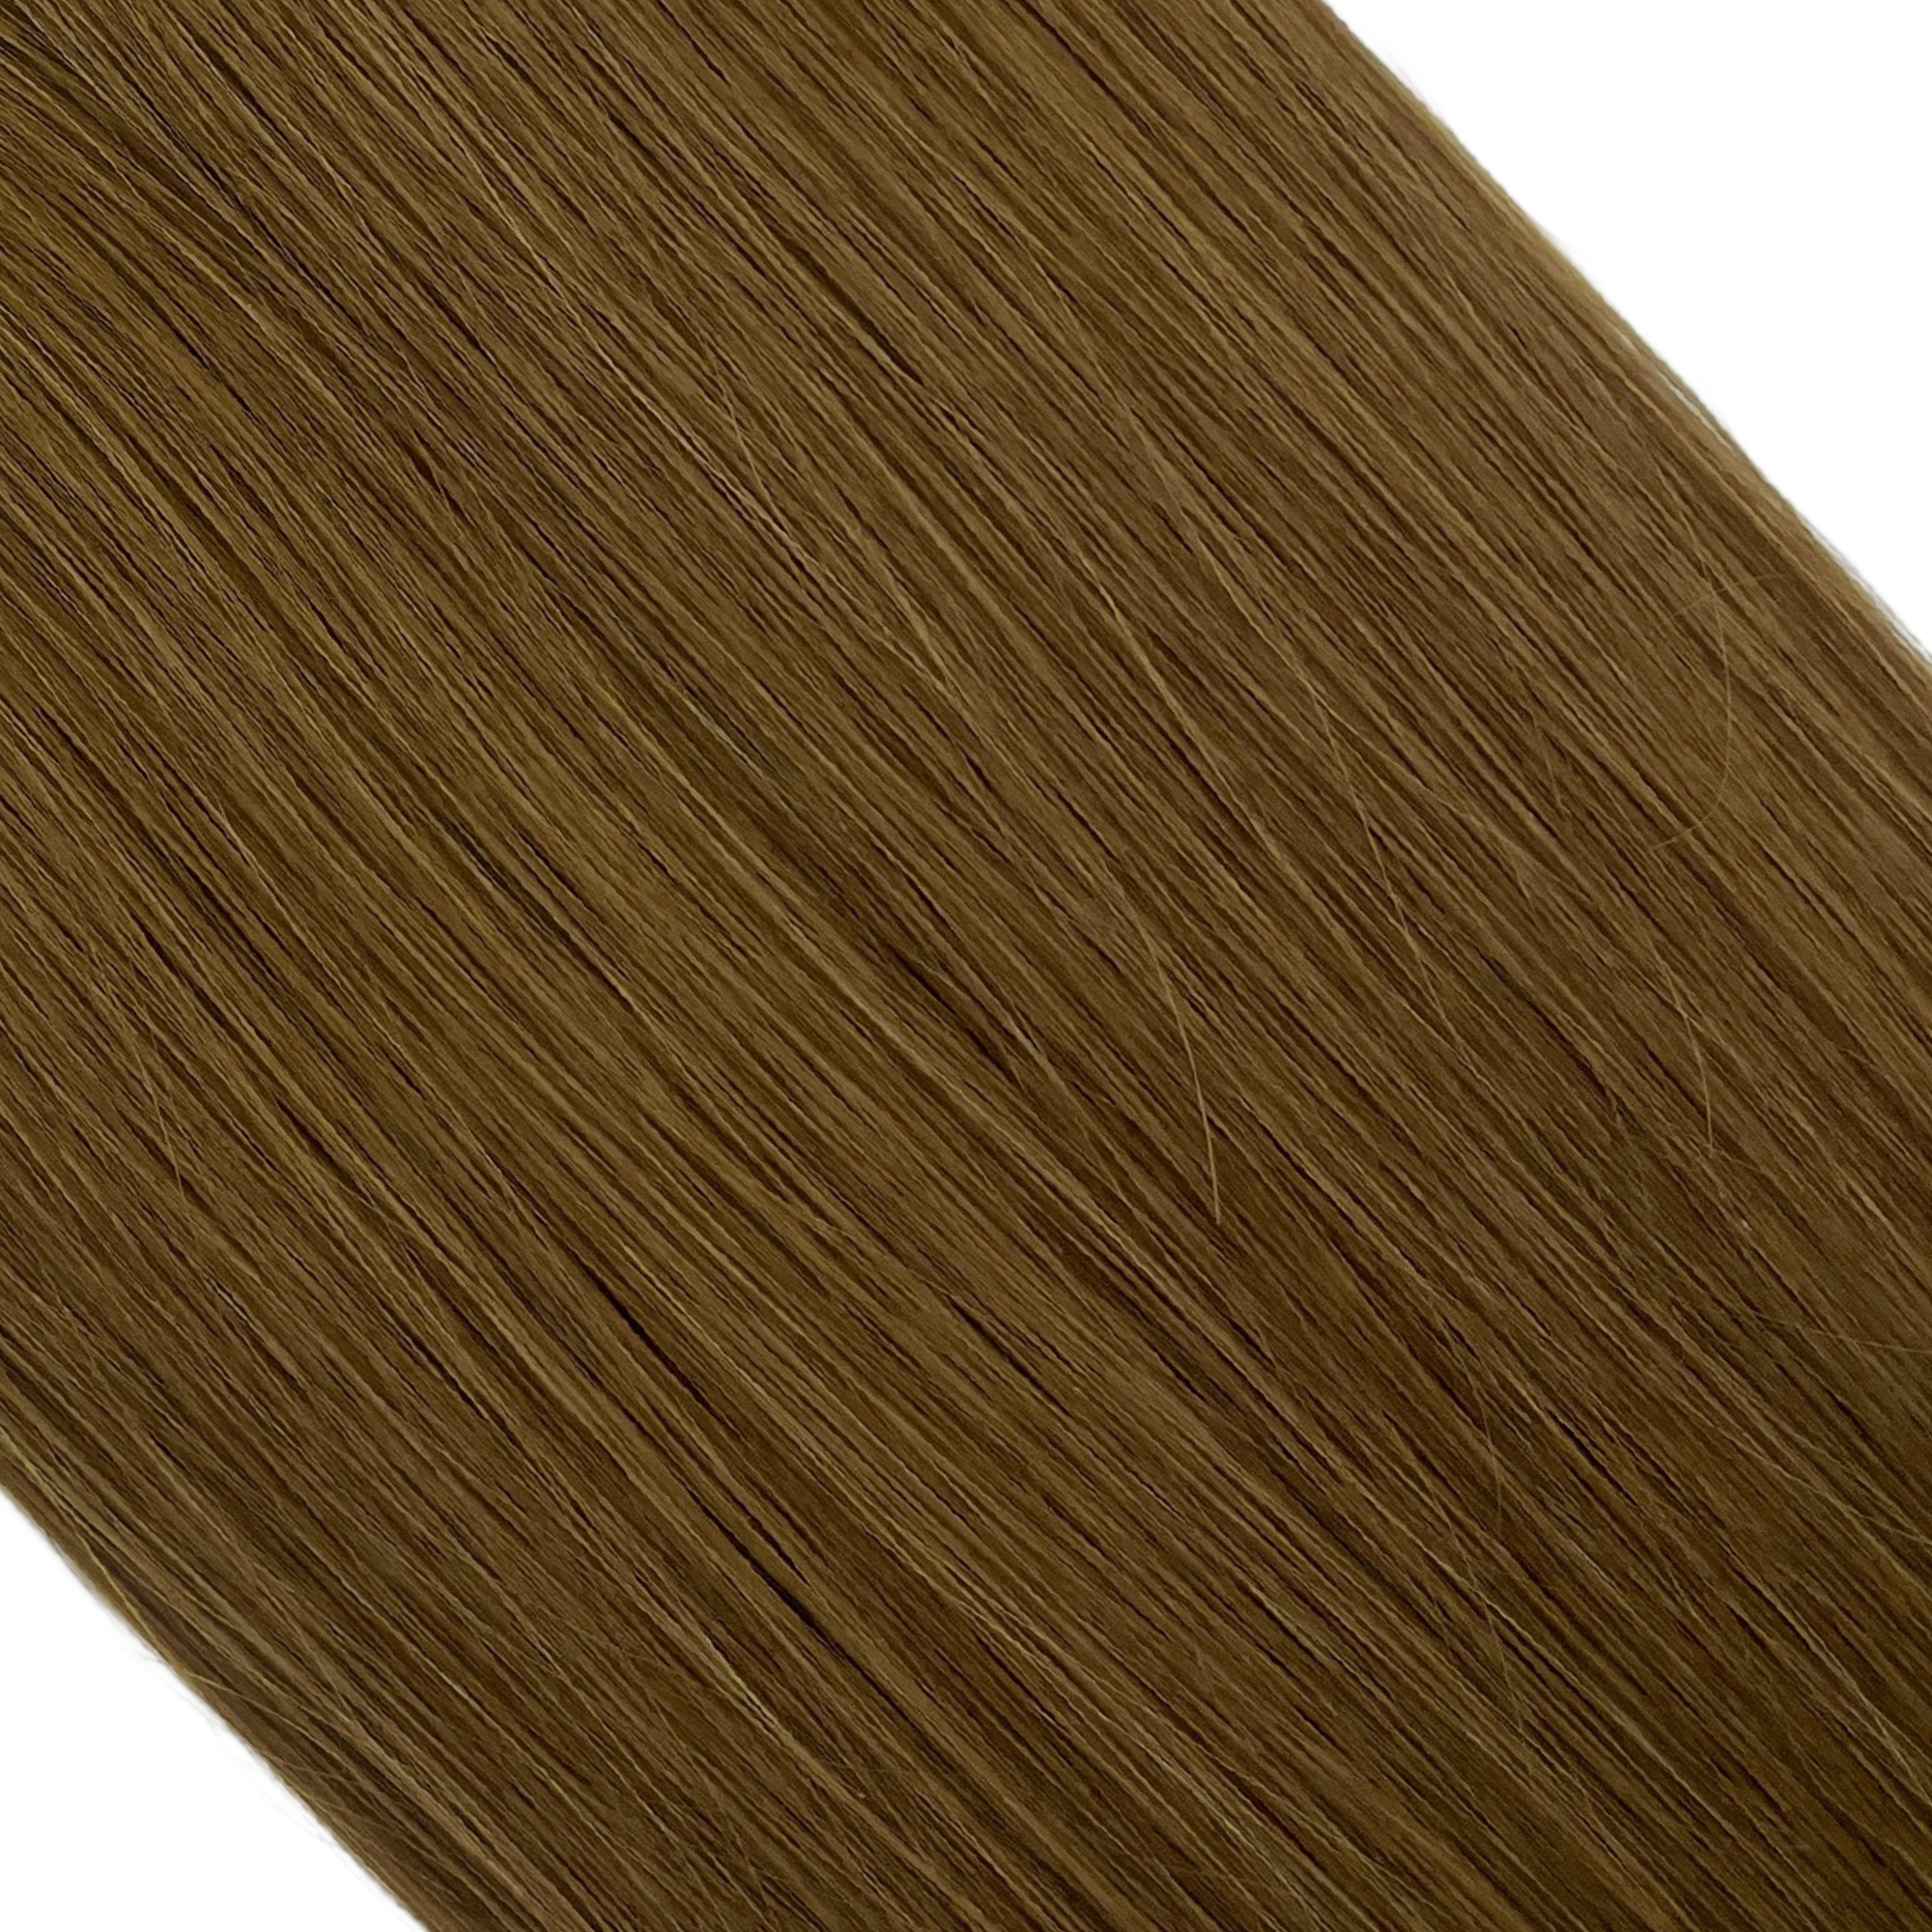 "hair rehab london 18" tape hair extensions shade swatch titled hollywood hottie"